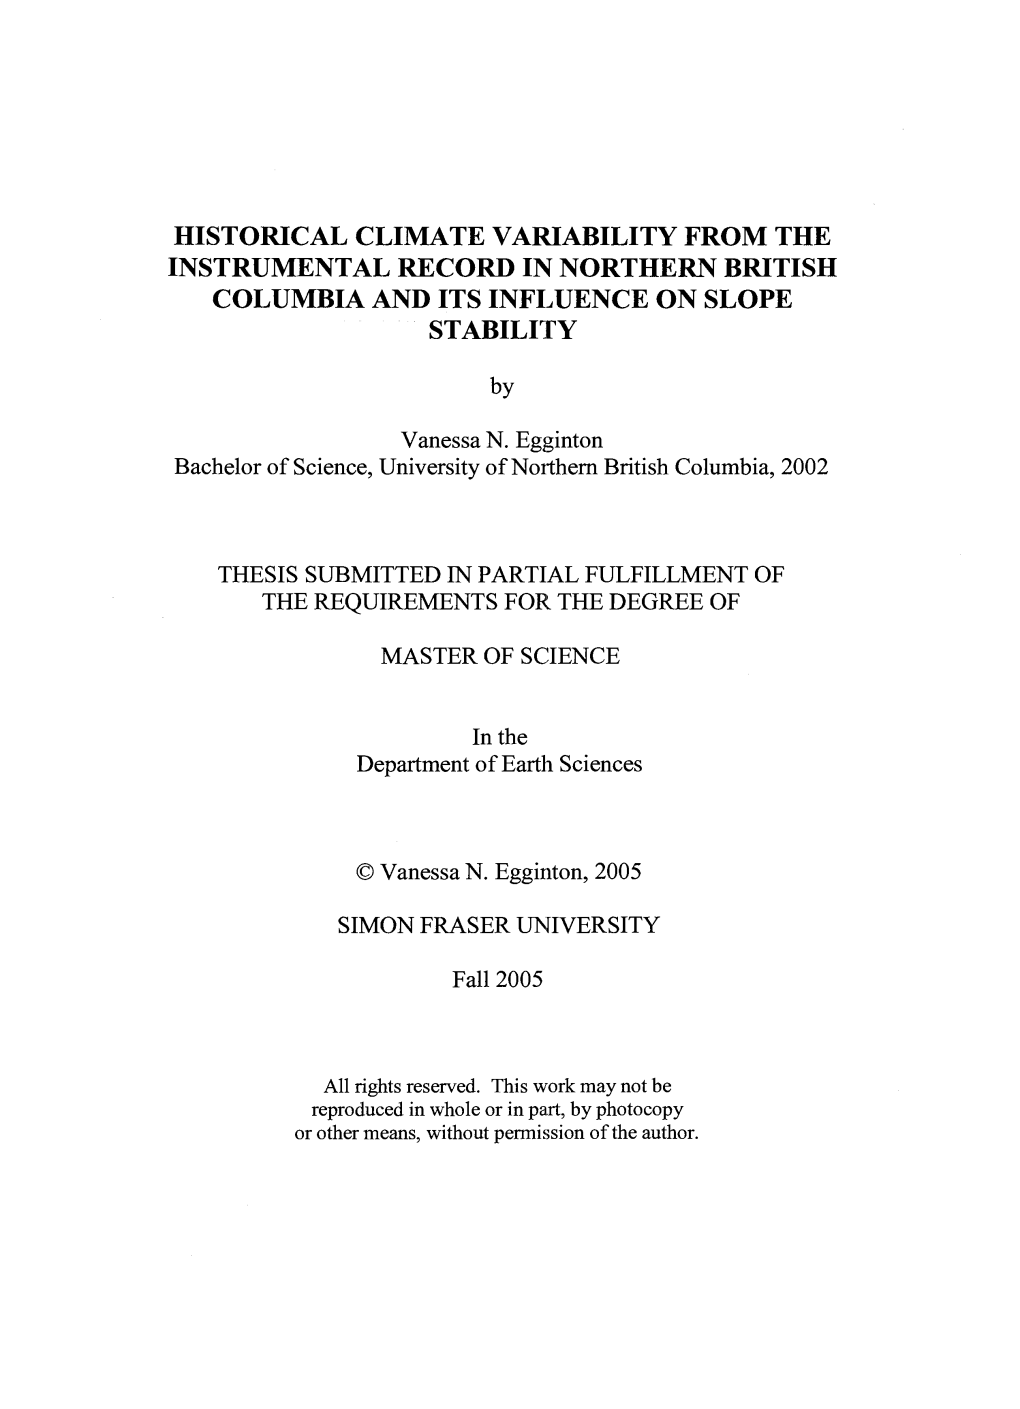 Historical Climate Variability from the Instrumental Record in Northern British Columbia and Its Influence on Slope Stability